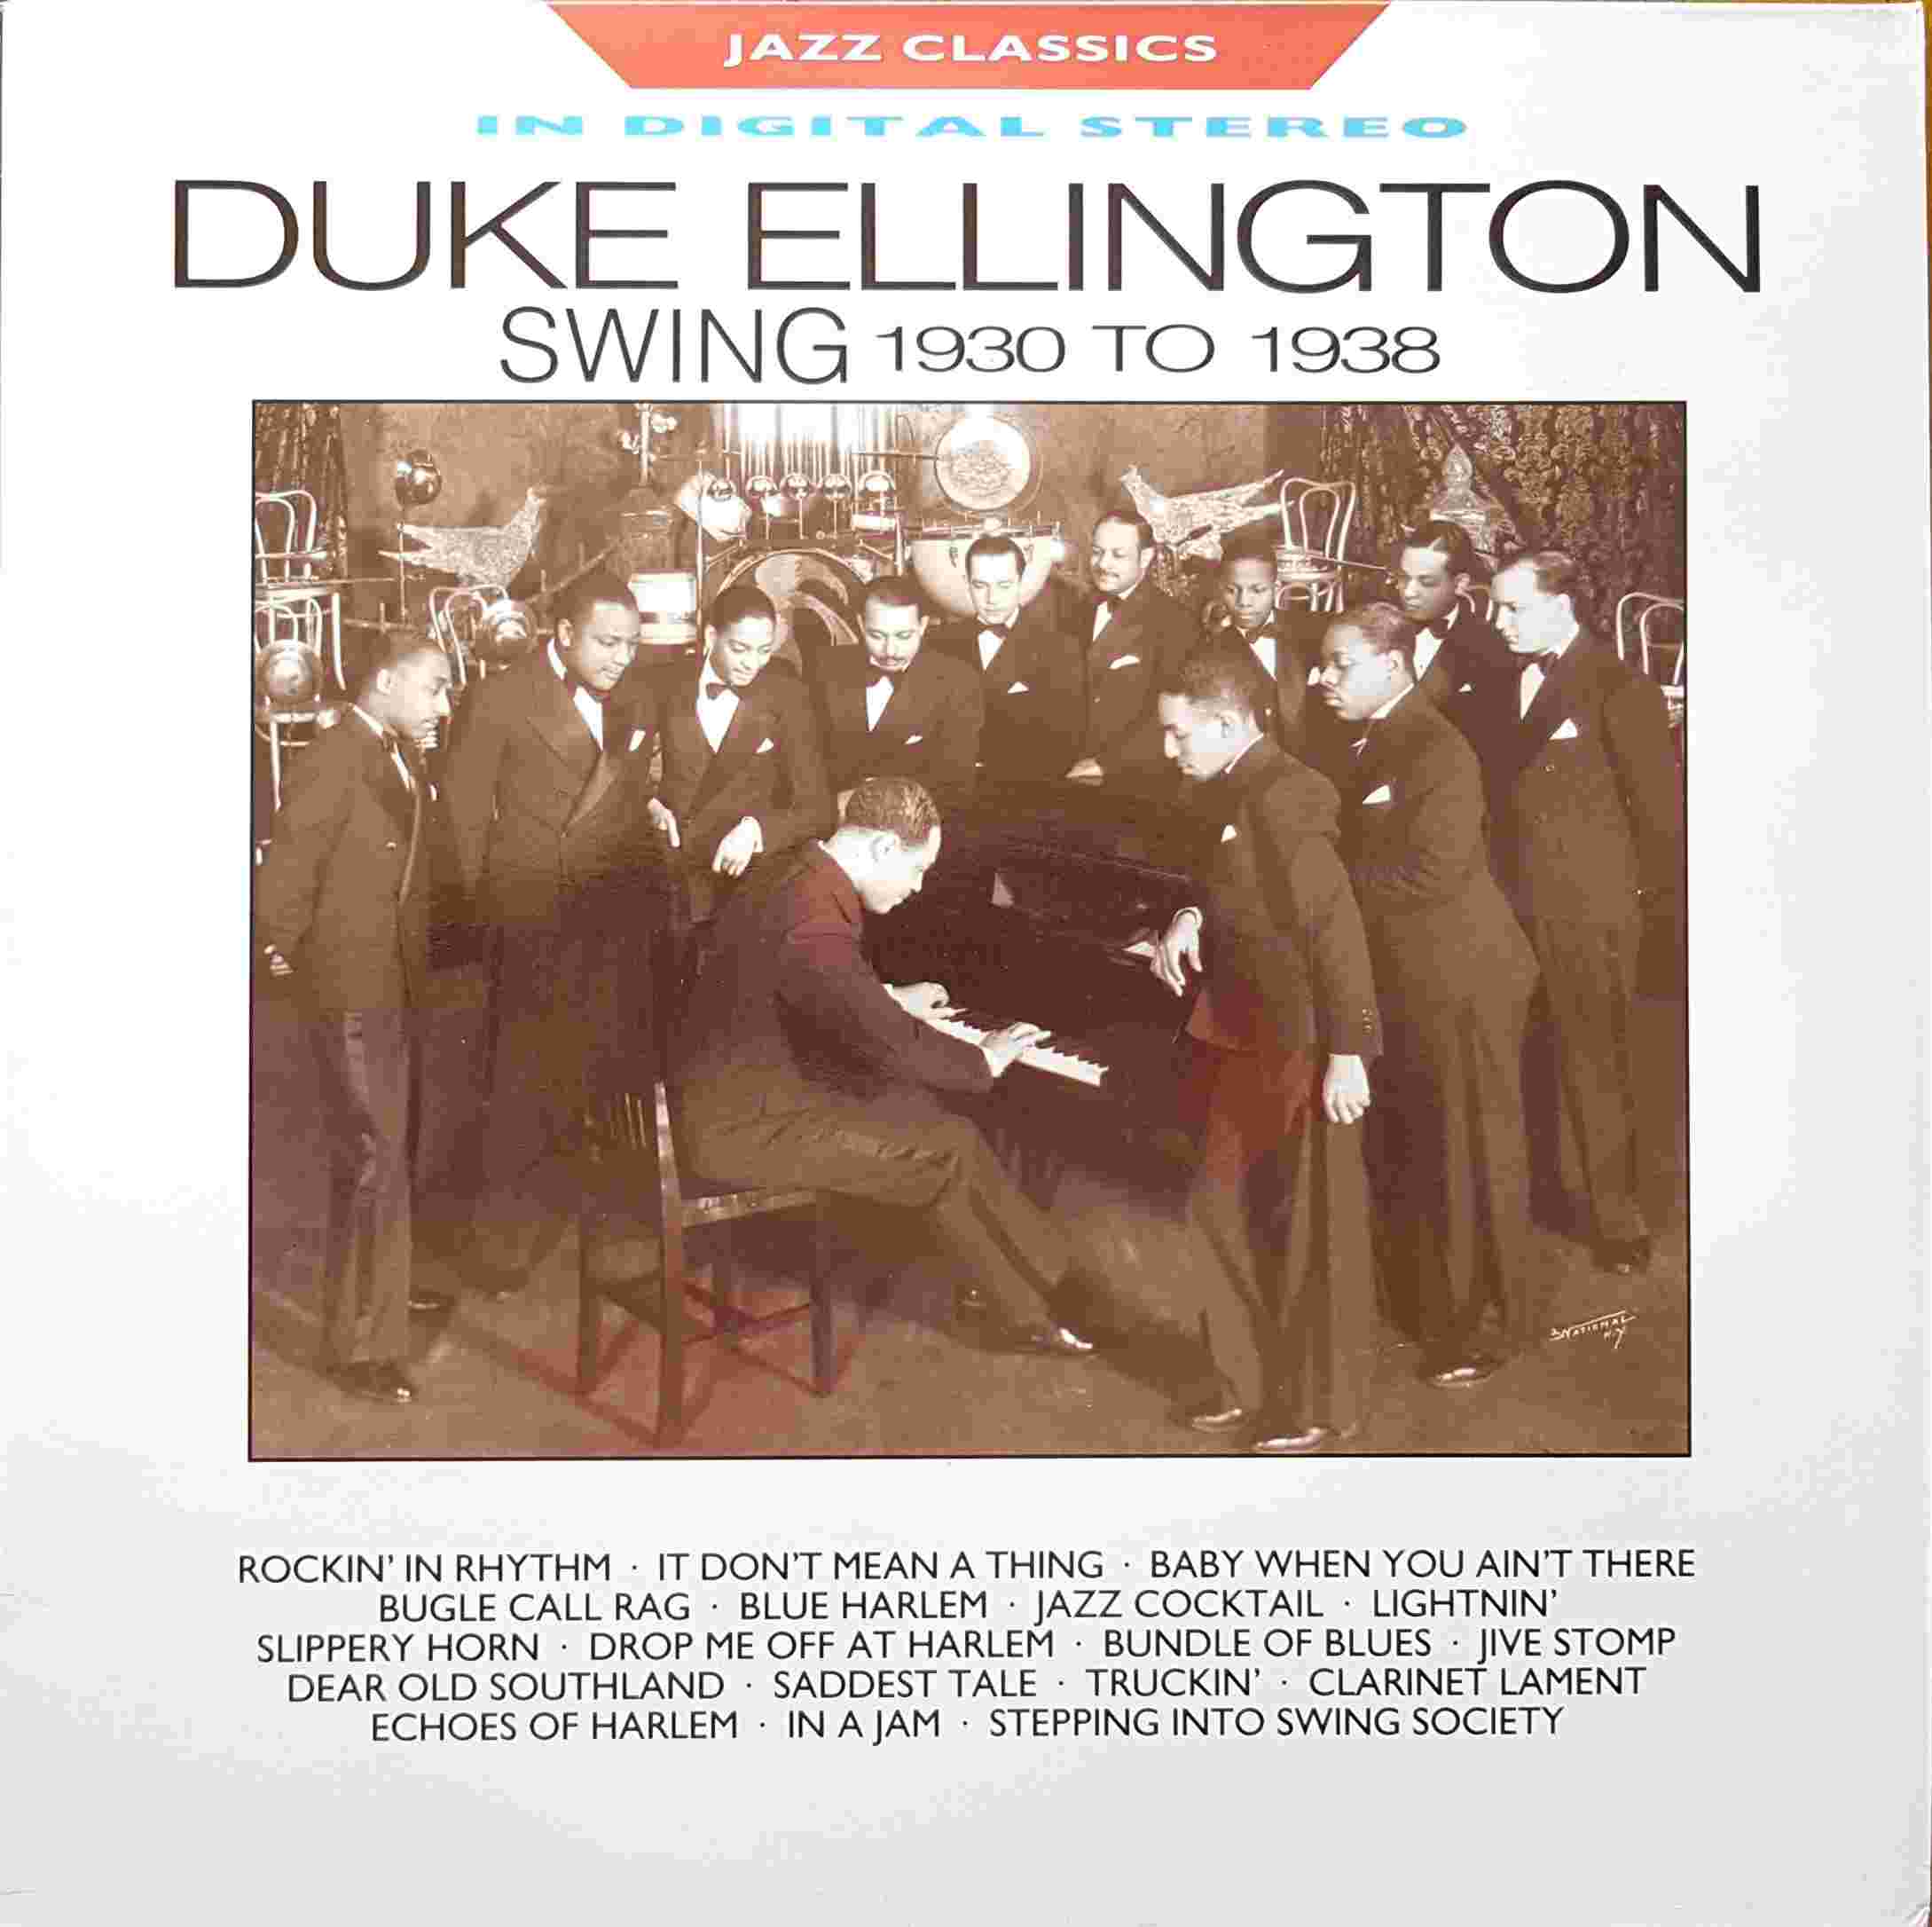 Picture of REB 686 Jazz classics - Duke Ellington by artist Duke Ellington from the BBC albums - Records and Tapes library